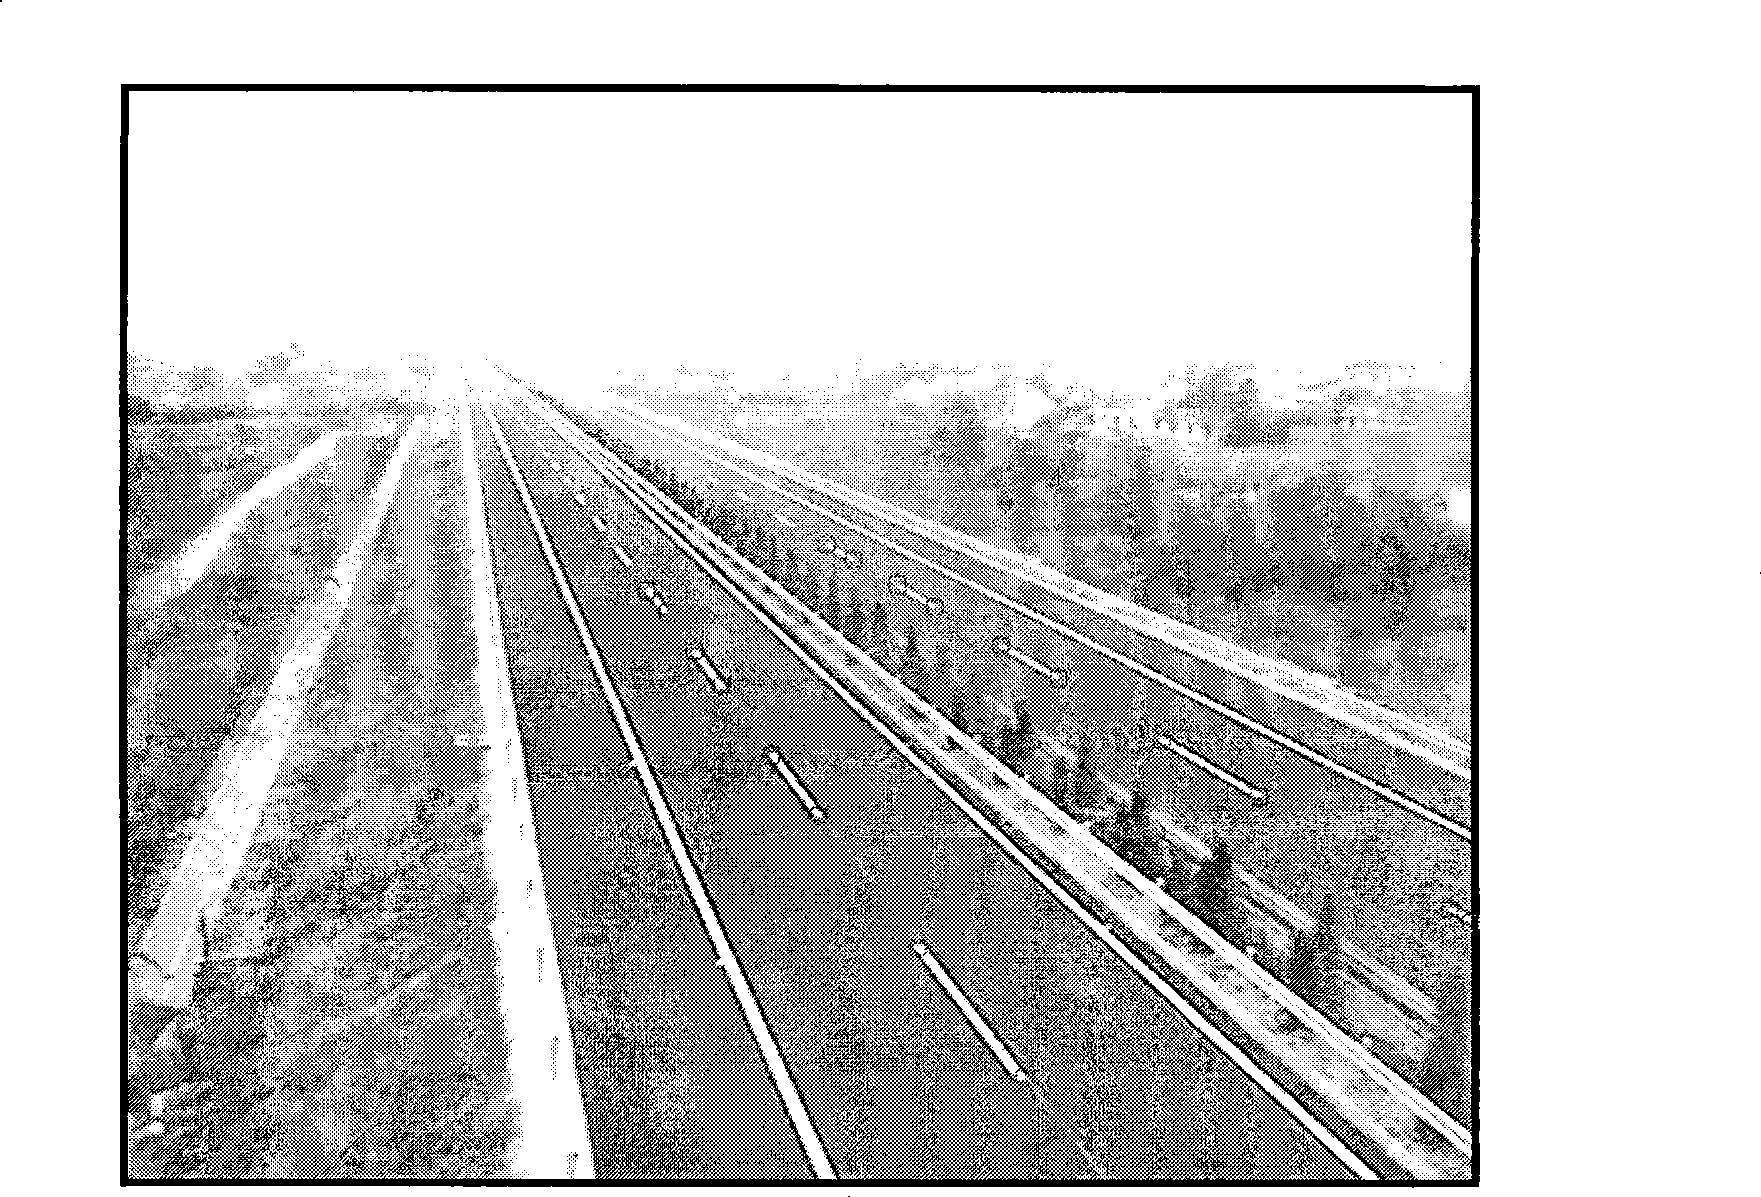 Visibility detecting method based on monitoring video of traffic condition